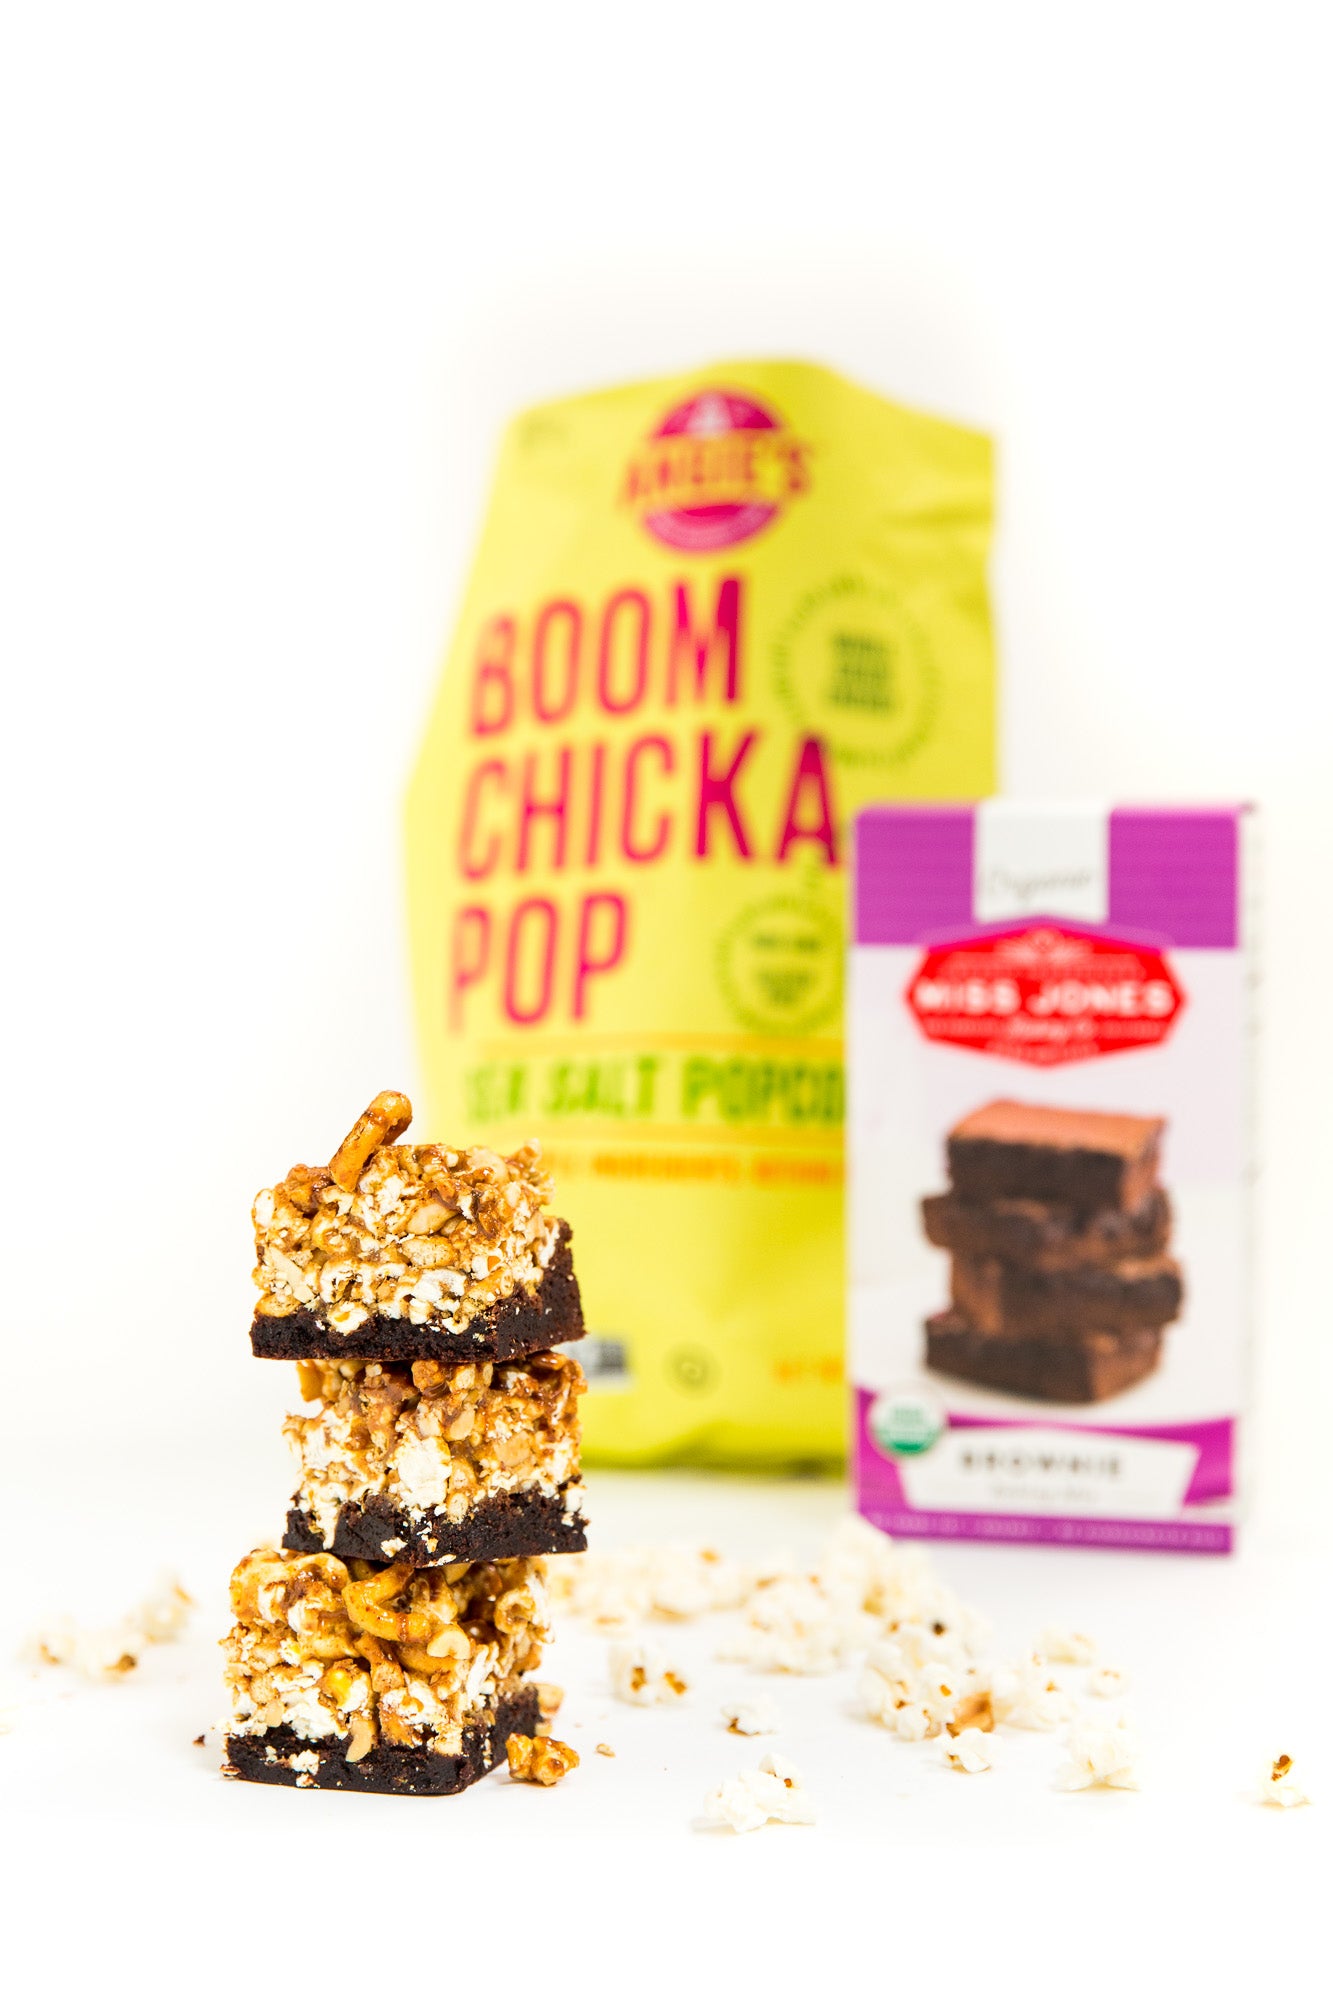 Image of three Miss Jones Baking Co Popcorn Brownies stacked in front of a box of Miss Jones Brownie Mix and a bag of Boom Chicka Pop Sea Salt Popcorn